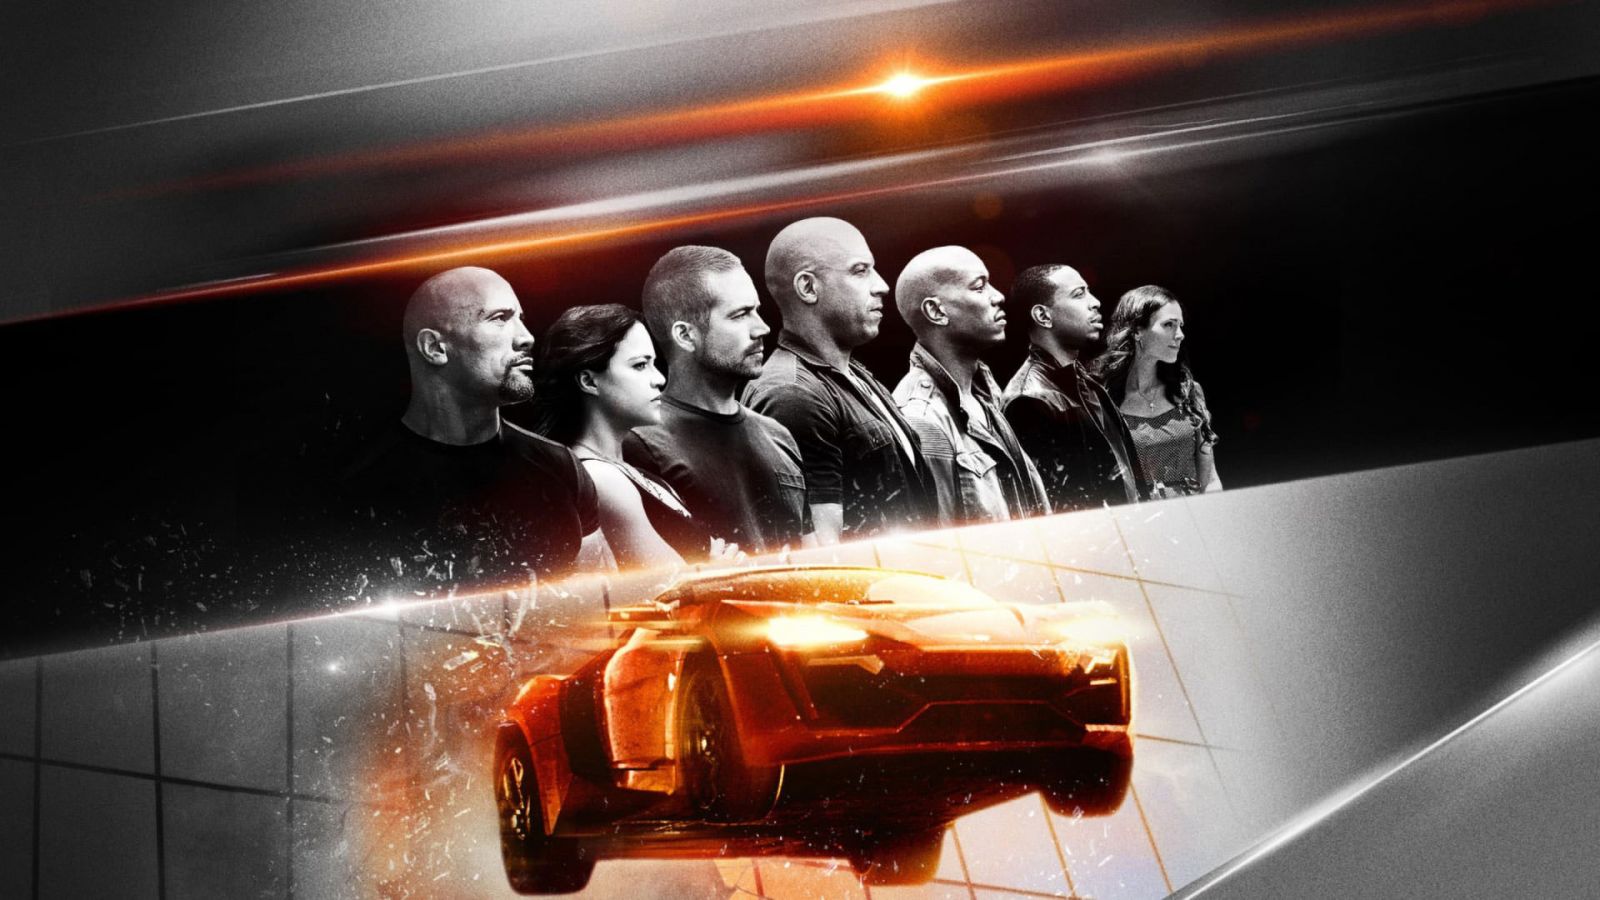 Fast and Furious 7 2015 Full Movies, Fast and Furious 7 2015 Full Film, Fast and Furious 7 2015 Full Movies Watch, Fast and Furious 7 2015 Full Film Watch, Fast and Furious 7 2015 Full Movies Watch Online Free, Fast and Furious 7 2015 Full Film Watch Free Online, Watch Streaming HD Fast and Furious 7 2015 Full Movies, Fast and Furious 7 2015 English Language Full Movies, Fast and Furious 7 2015 English Language Full Film Free Watch Online, Download Fast and Furious 7 2015 Full Movies Full HD 1080P, Streaming Watch Free Movies Fast and Furious 7 2015 Full Version